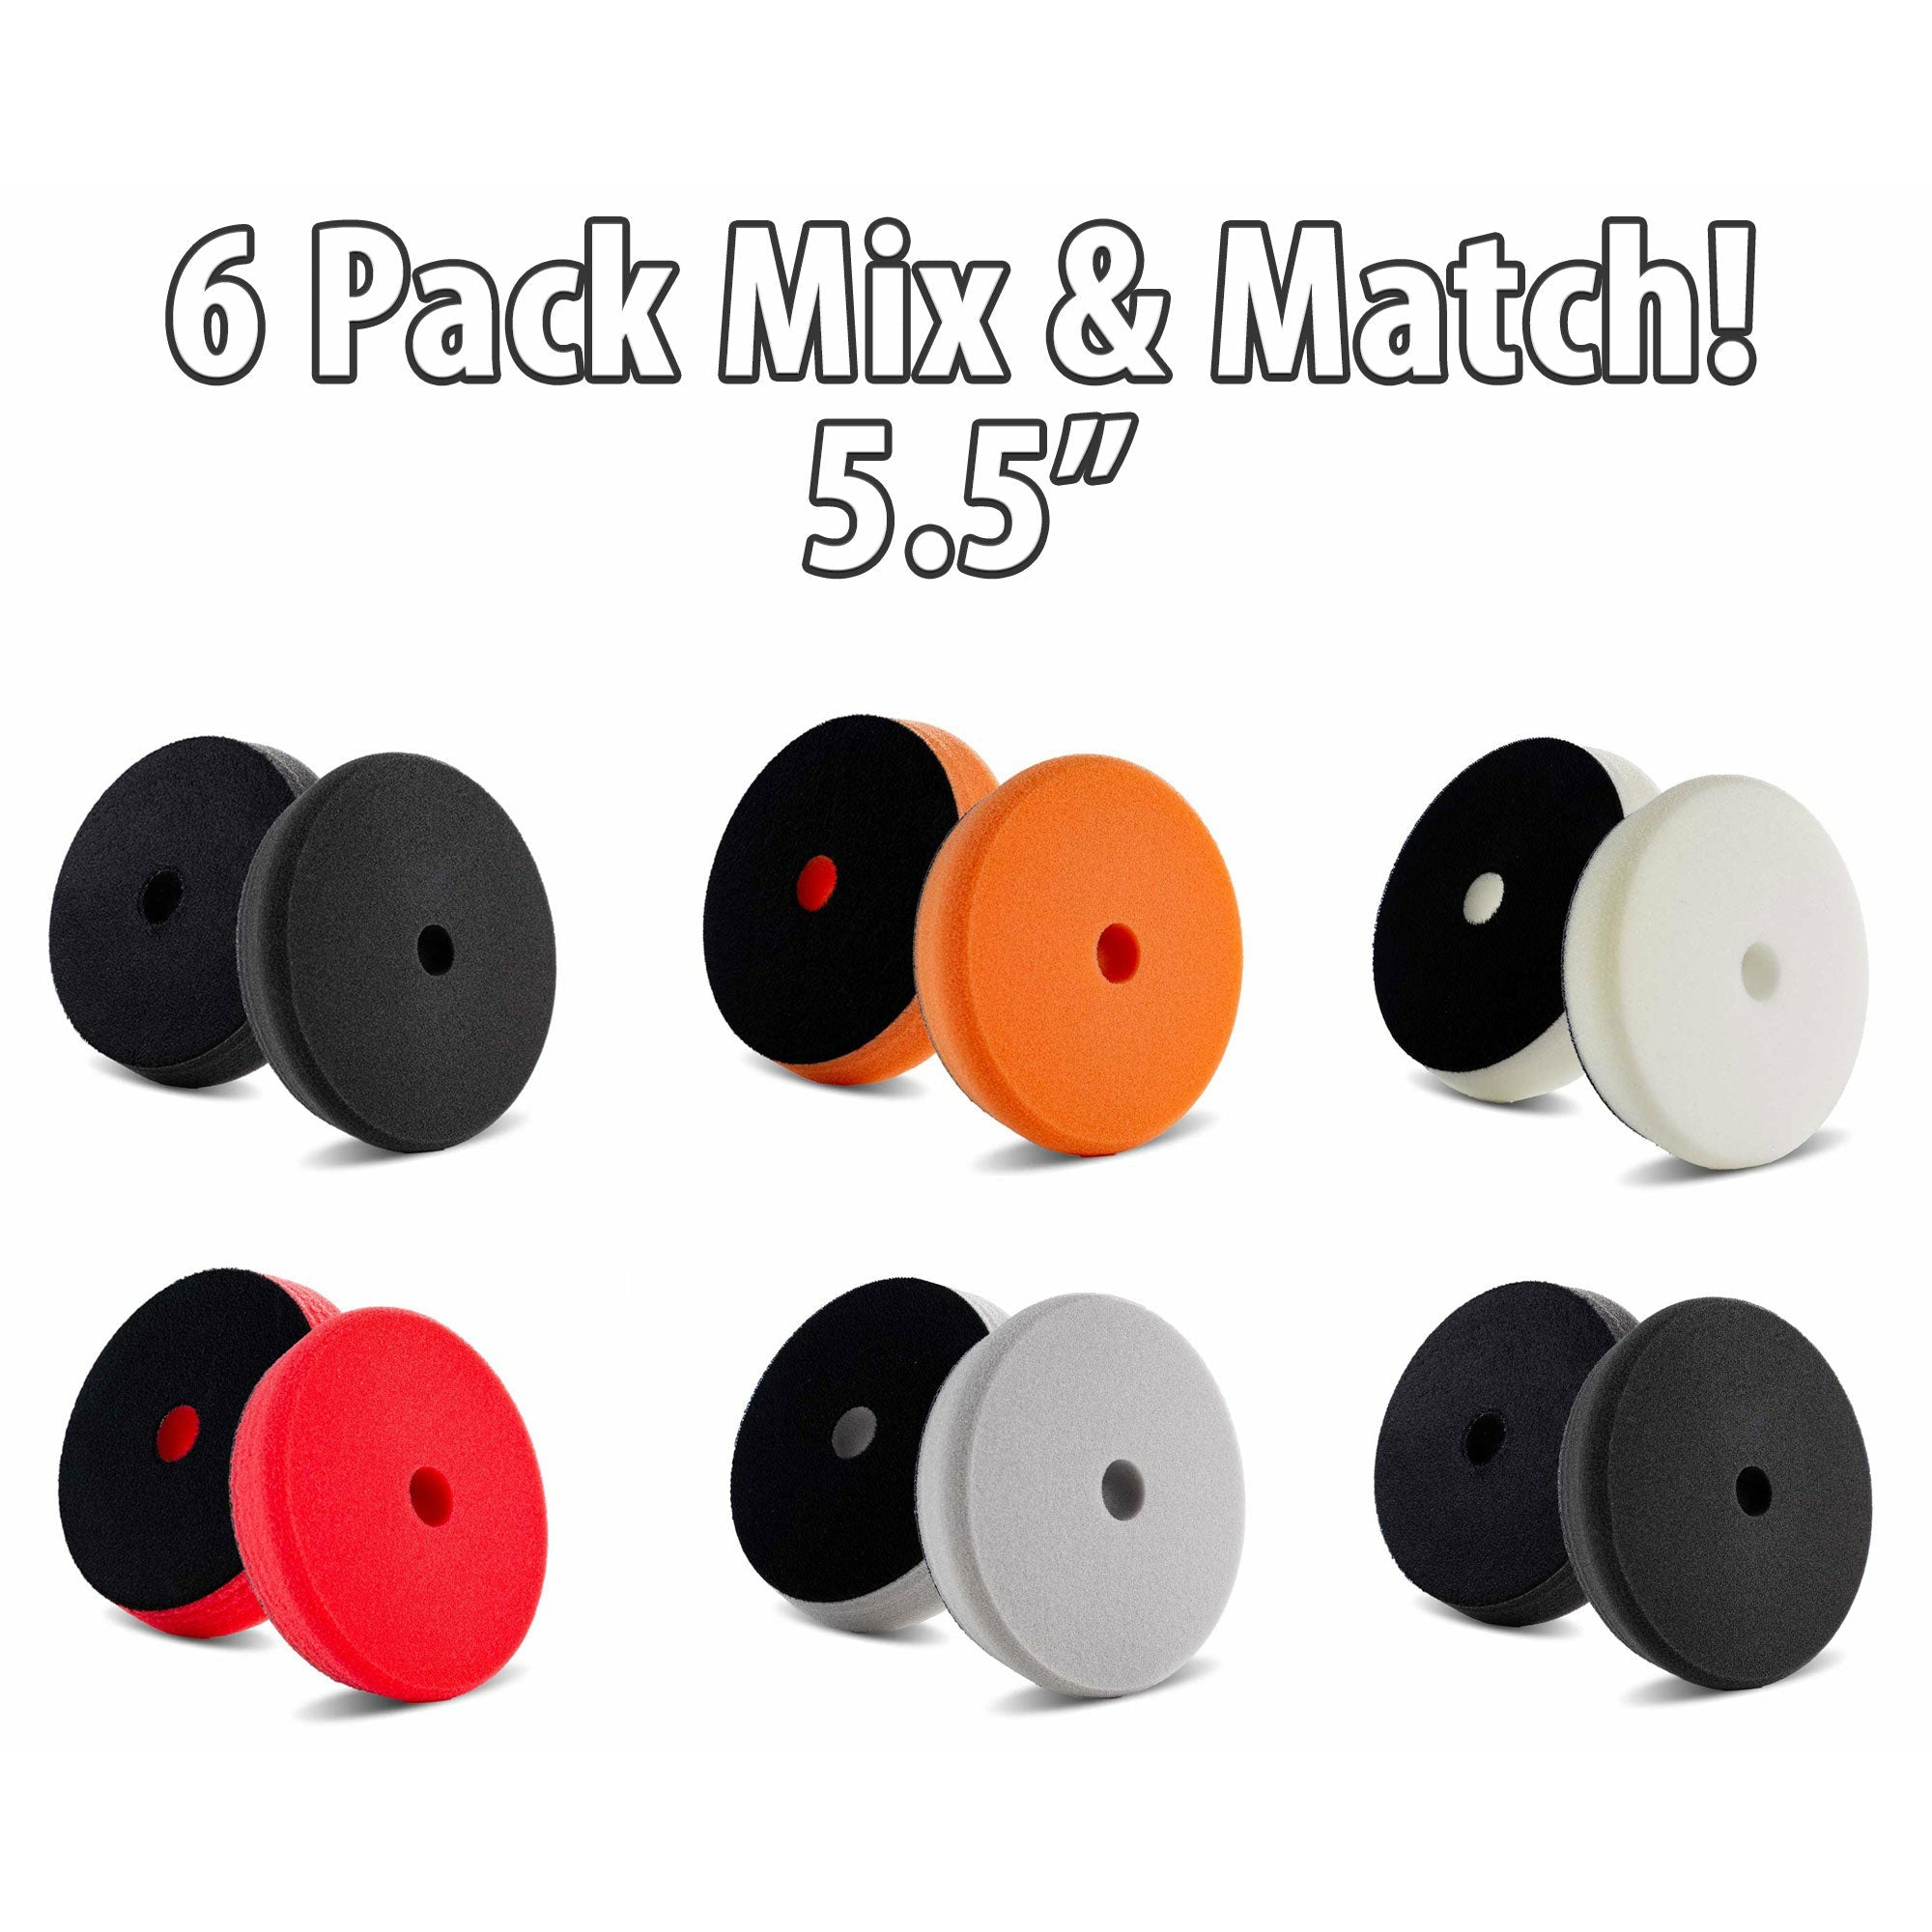 6 Pack 5.5 Inch Lake Country Force Hybrid Foam Pad - Your Choice - FREE BONUS!